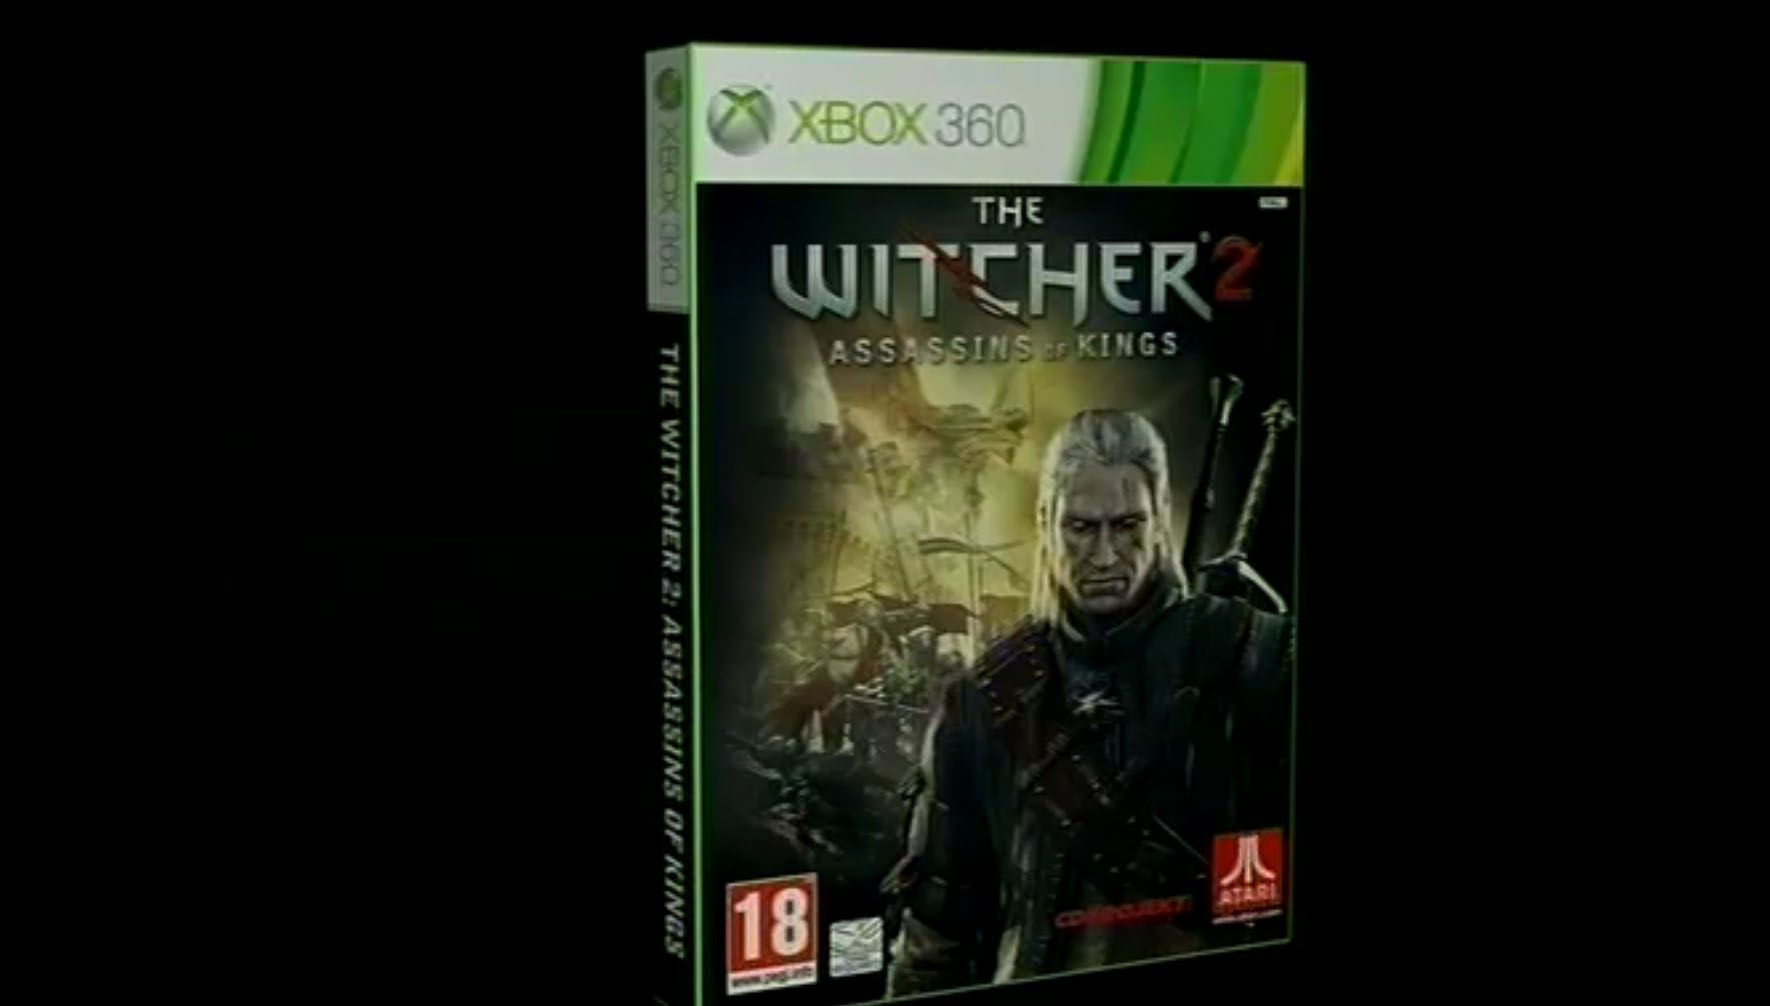 dier Lang spons CD Projekt Showcases and Details The Witcher 2 Version 2.0 And the Xbox 360  Version